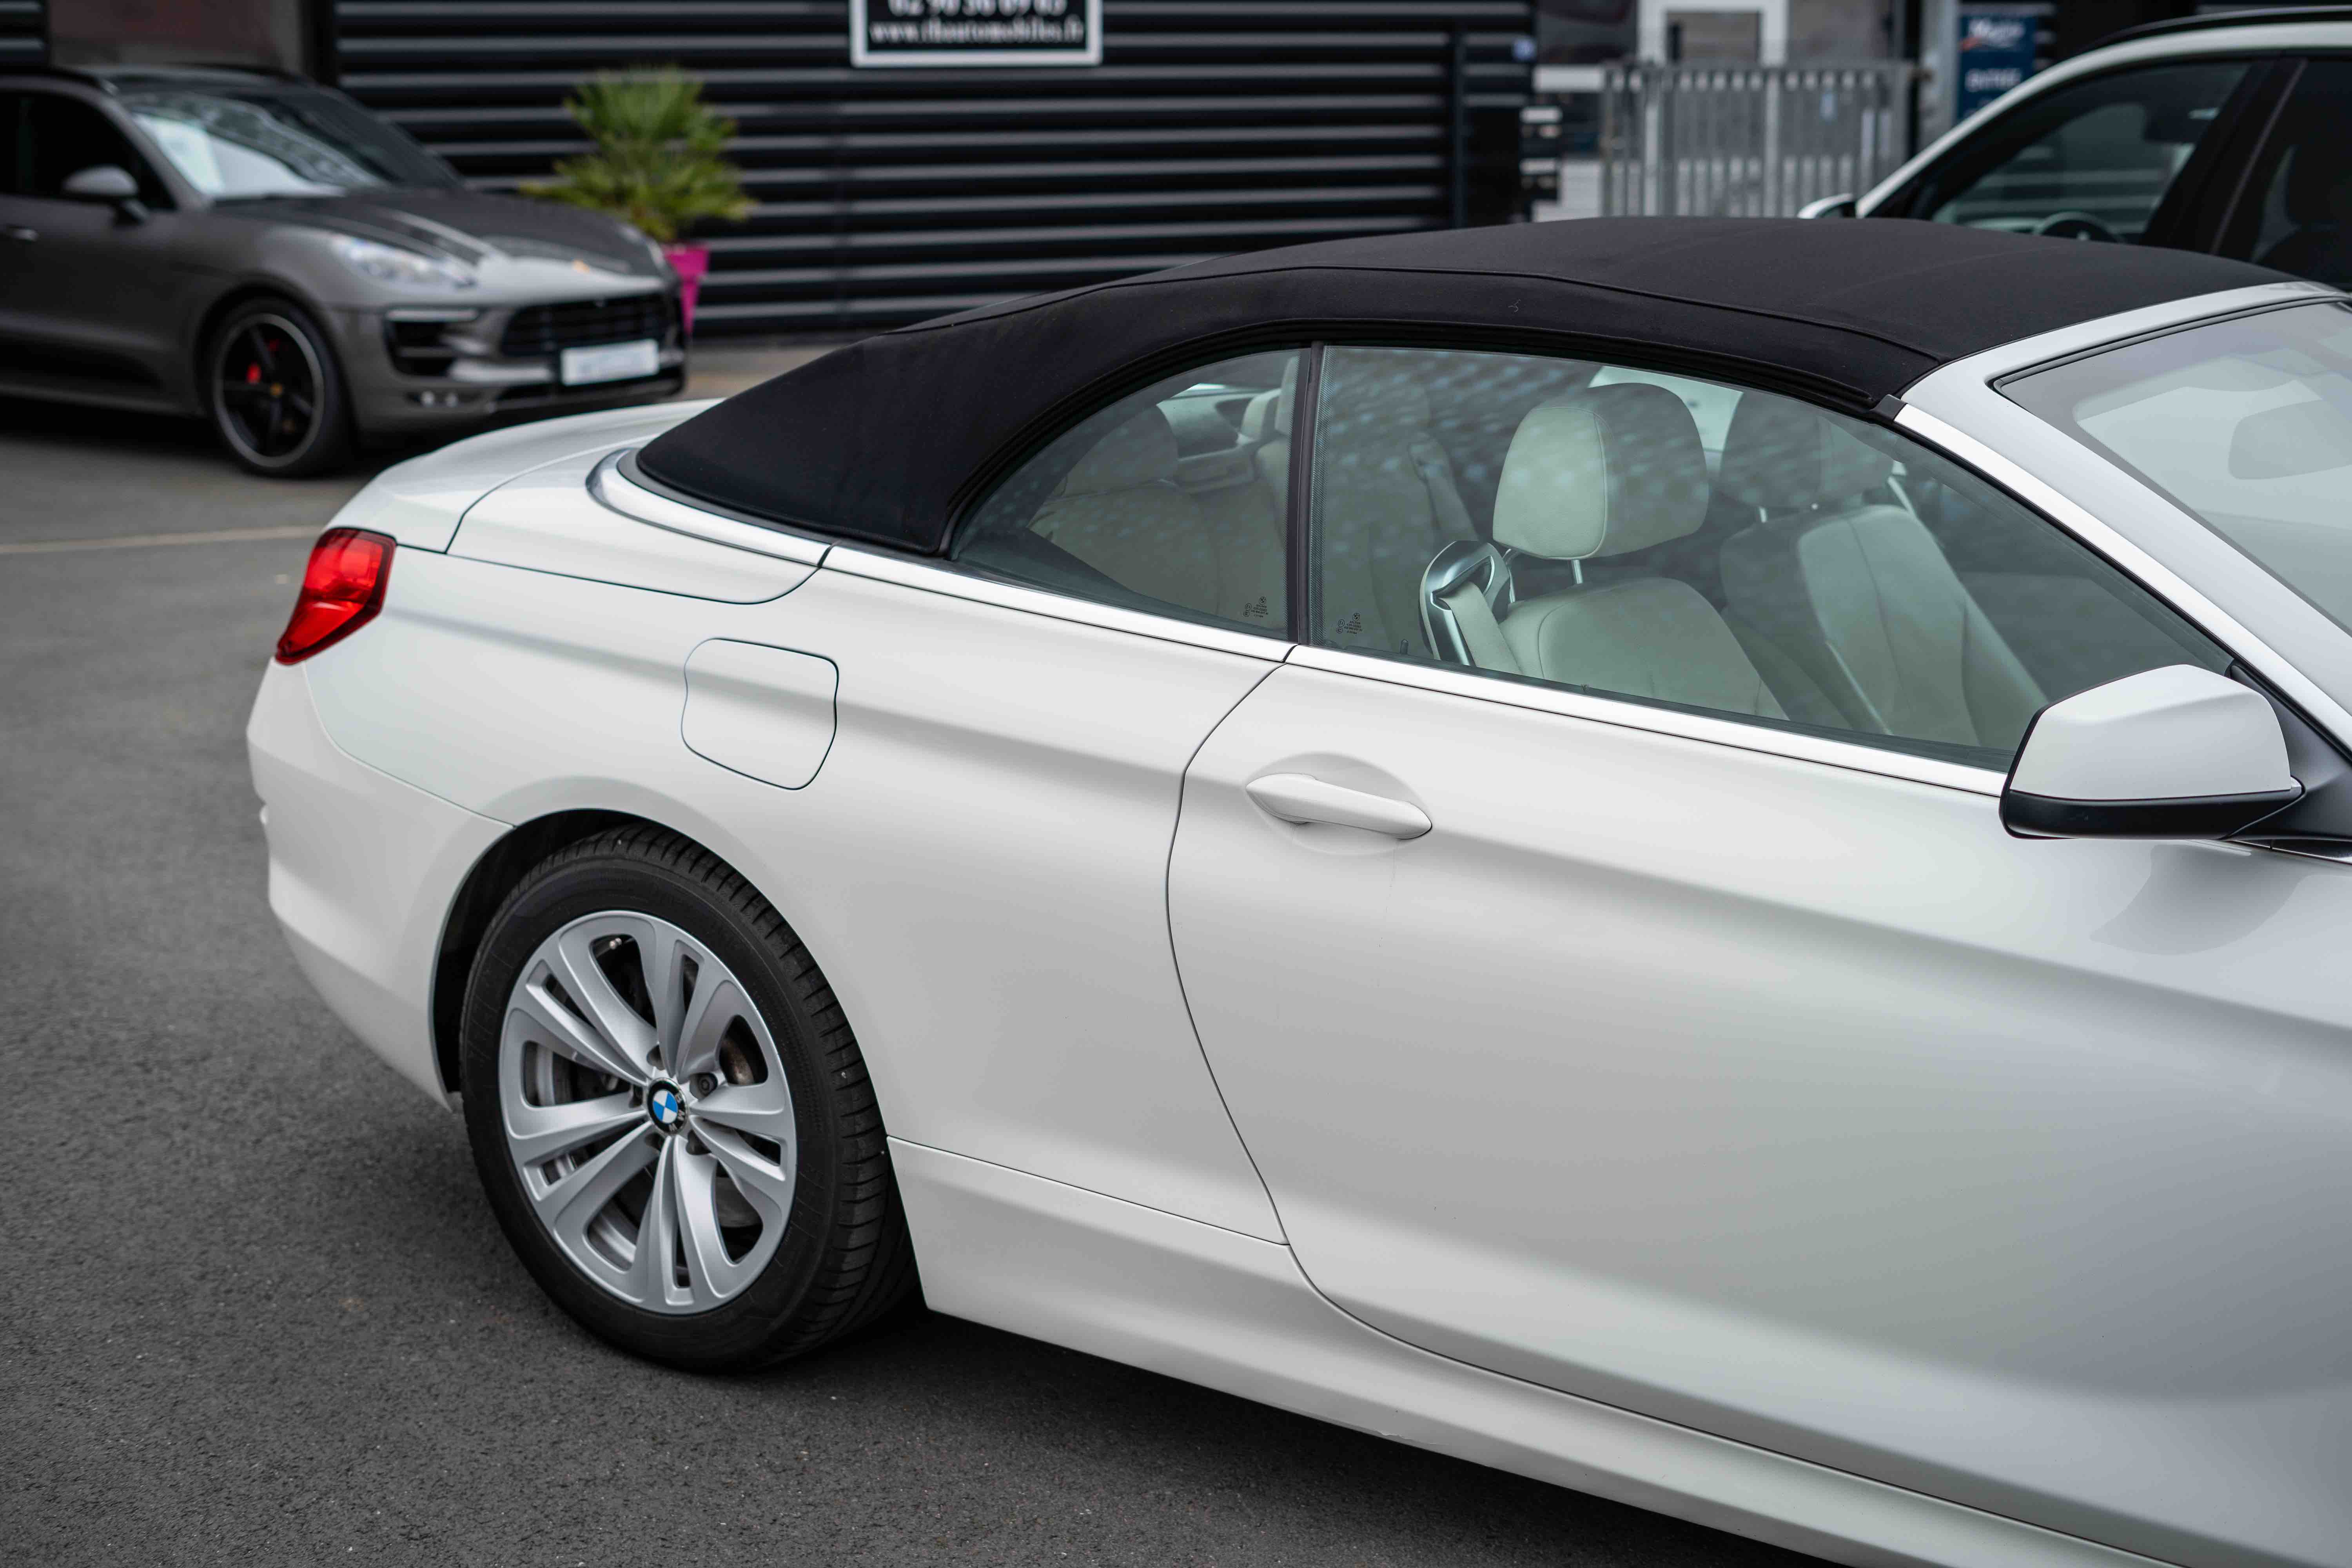 BMW SERIE 6 (F12) CABRIOLET 640I 320 LUXE BVA8